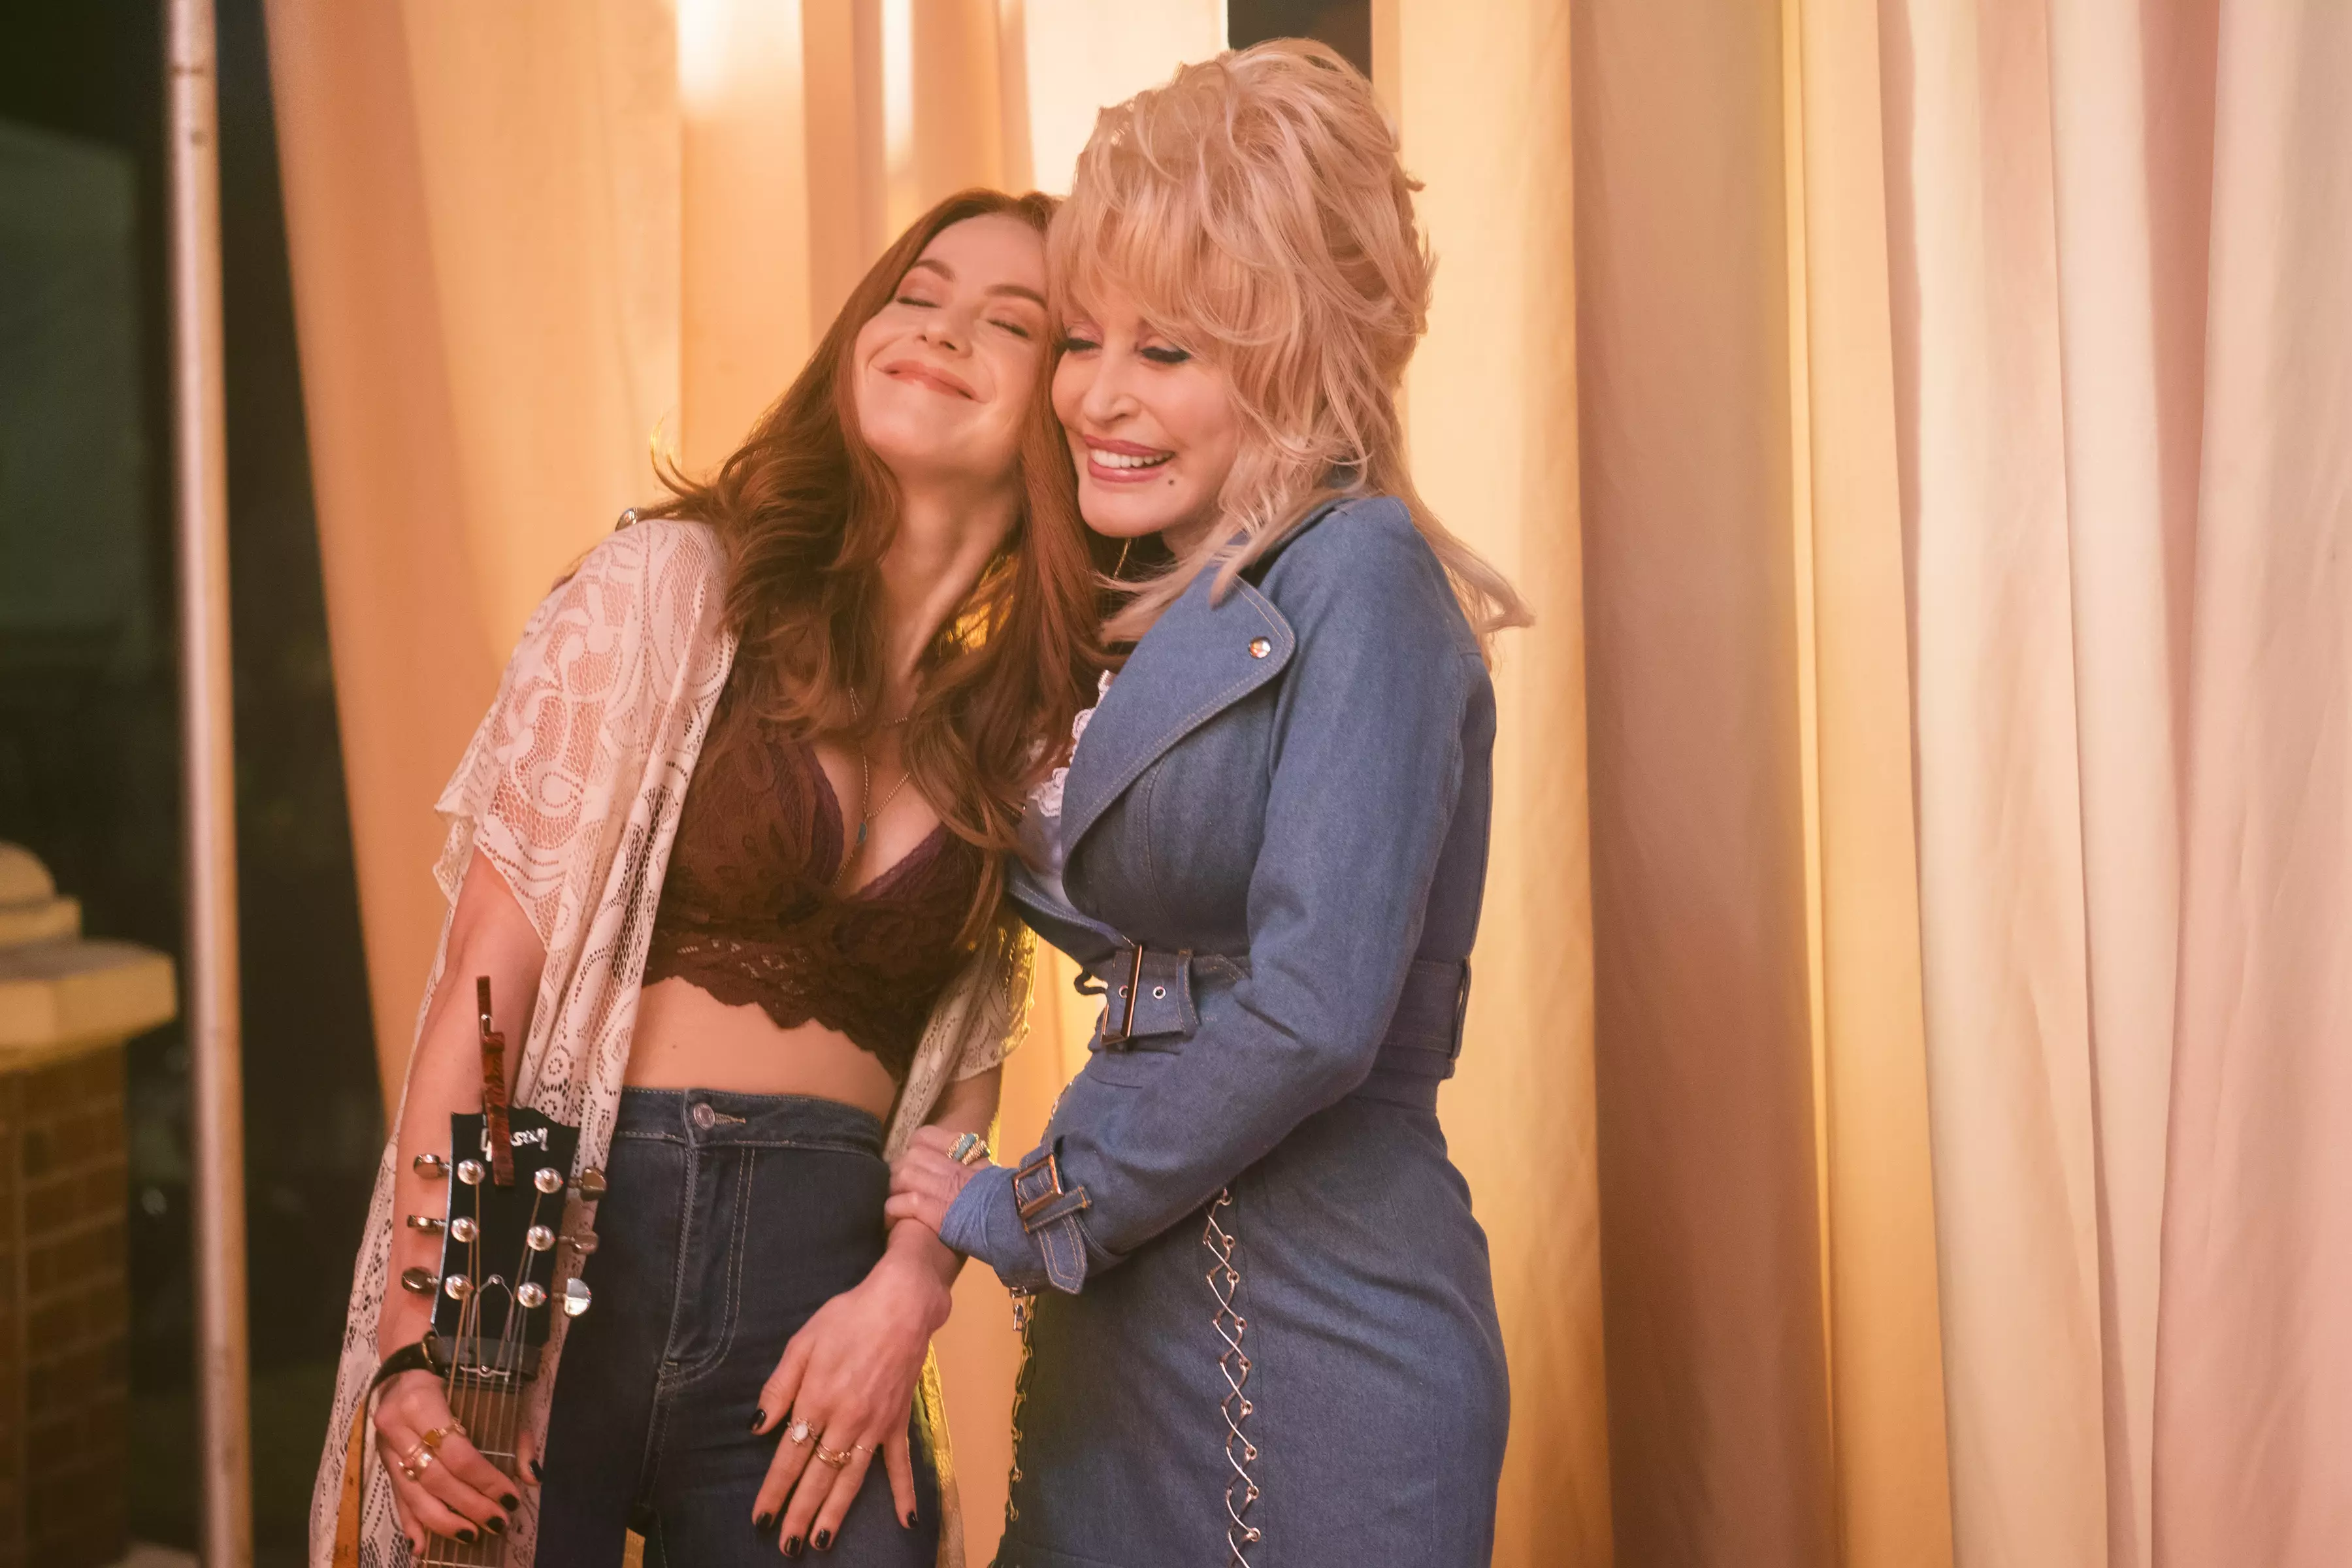 Dolly recently said she would have loved for her goddaughter Miley Cyrus to play Jolene, but she was busy so Julianne Hough was cast (